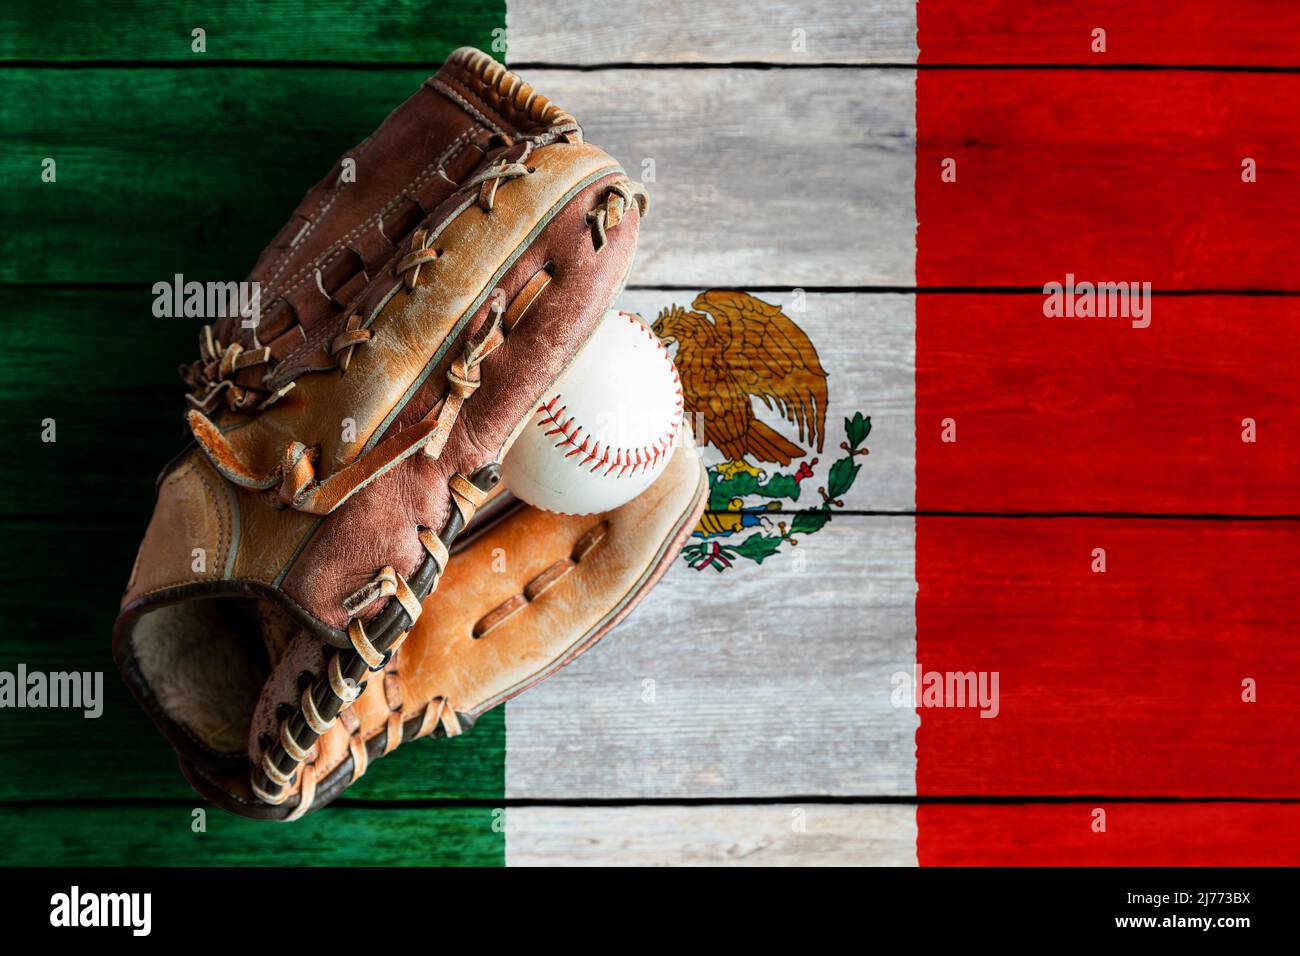 Leather baseball glove with ball on rustic wooden background with painted Mexican flag and copy space. Mexico is one of the world's top baseball natio Stock Photo